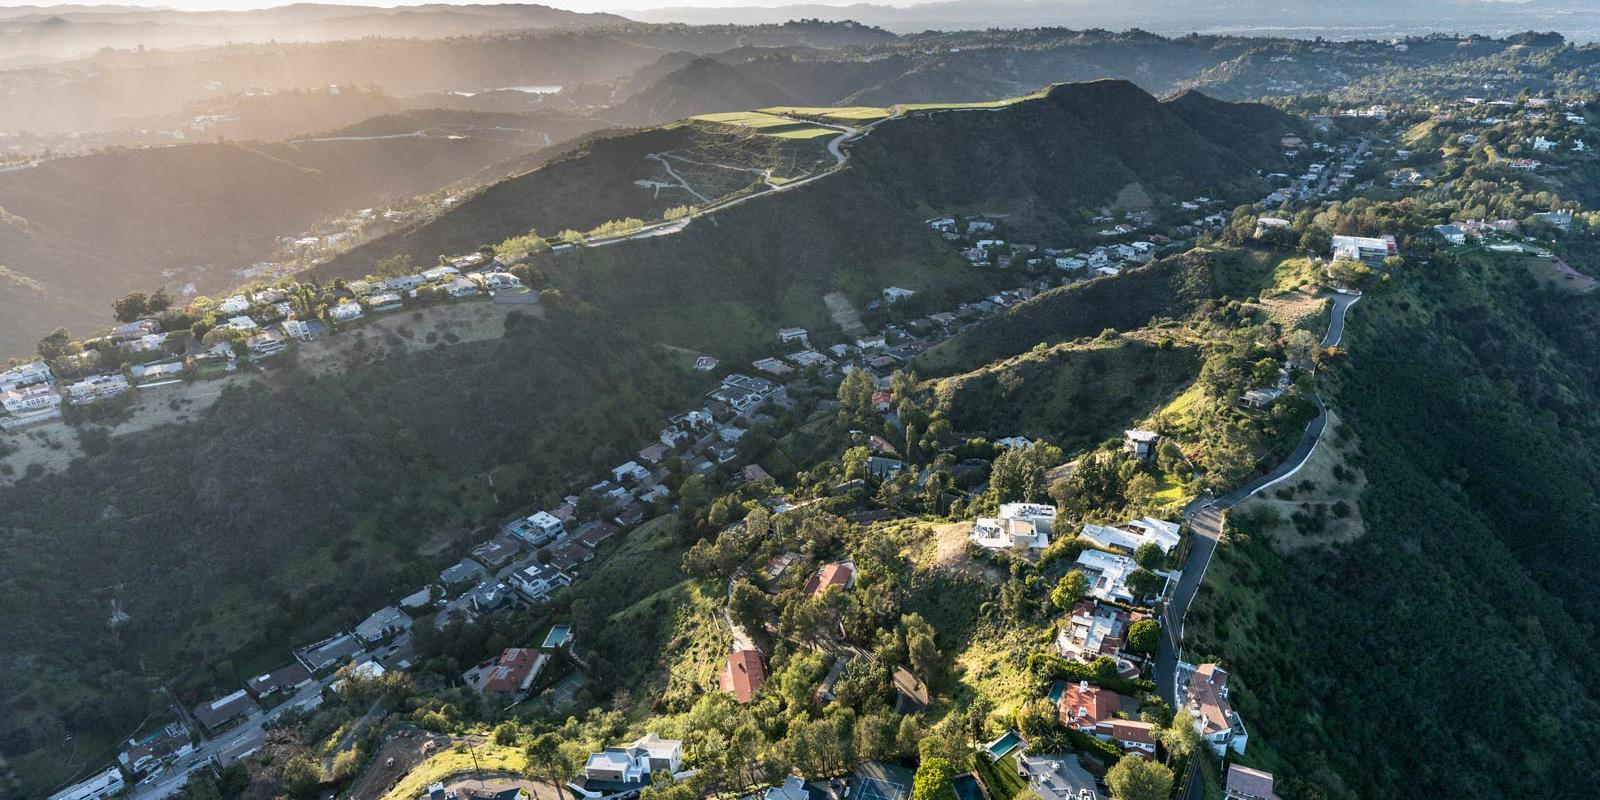 Aerial view of houses along the Santa Monica Mountains.